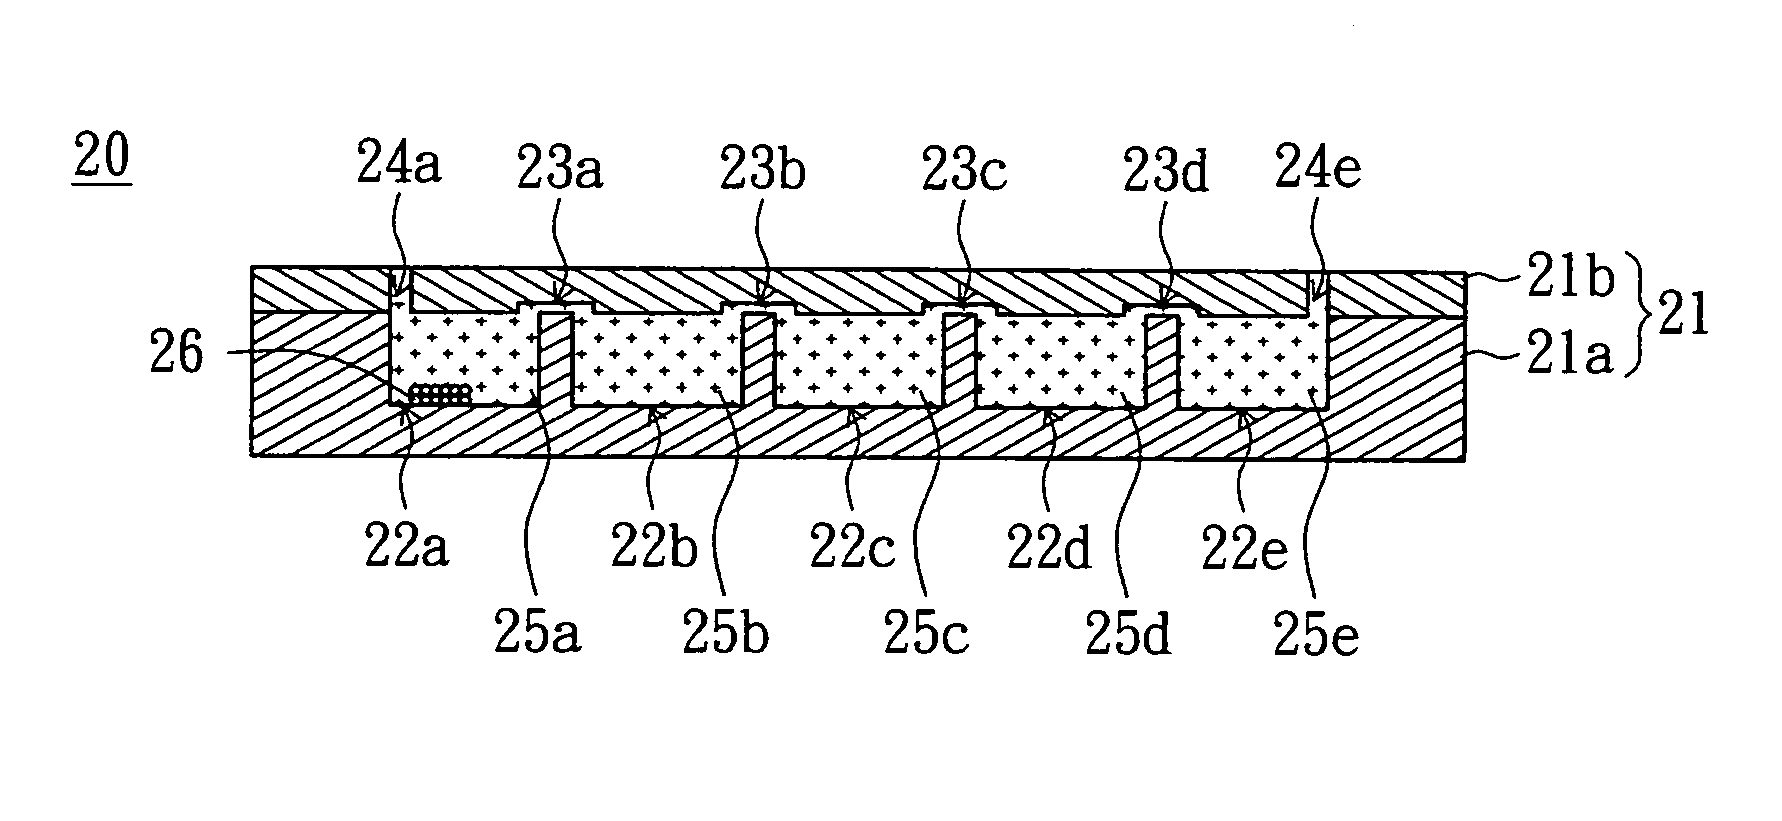 Magnetic bead-based sample separating device